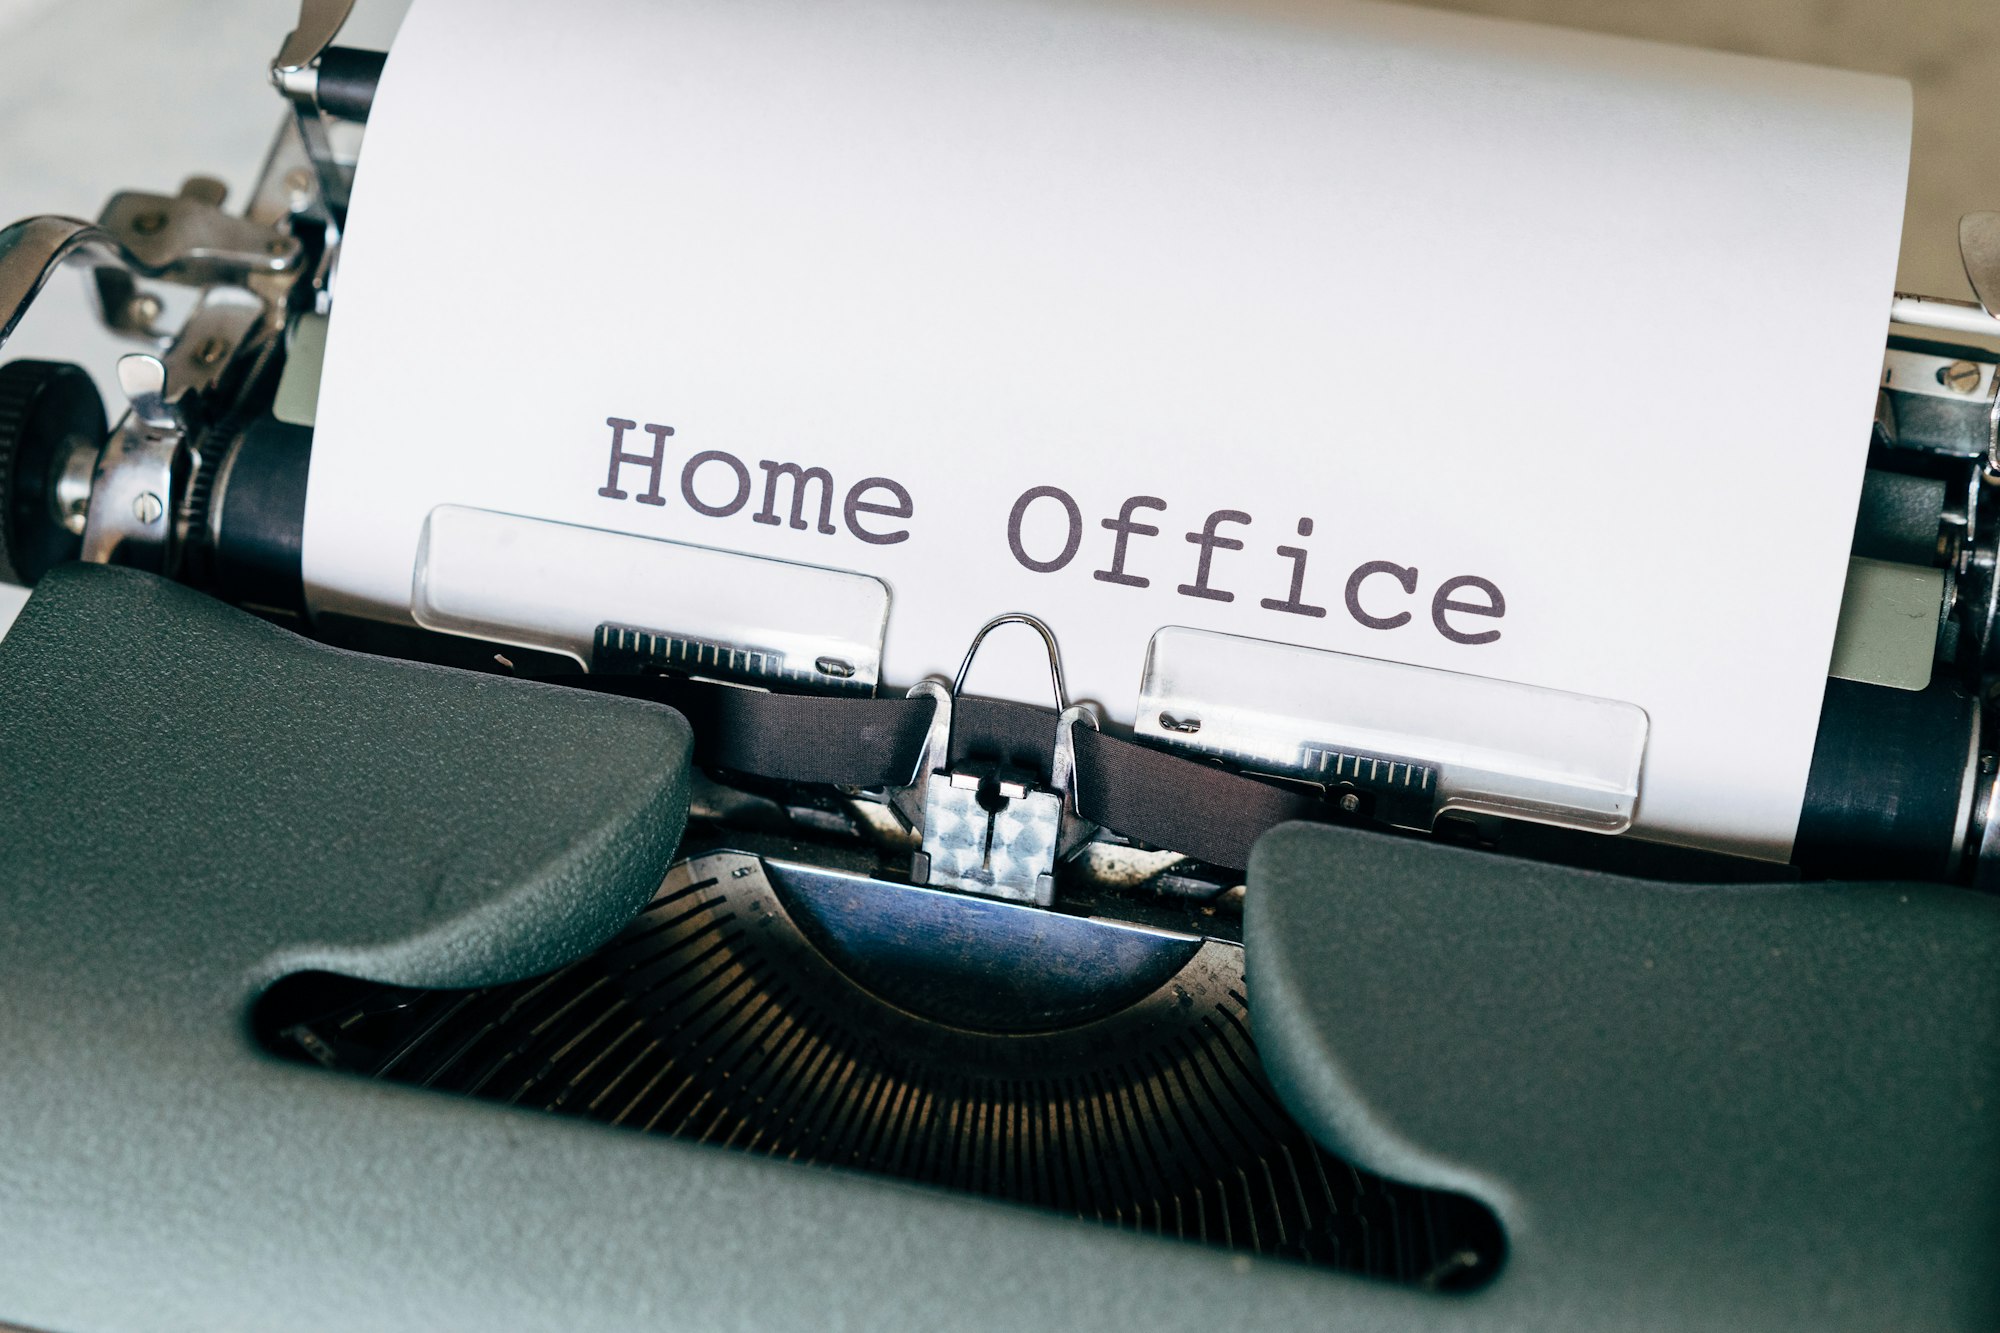 Data protection in the home office - what you need to consider